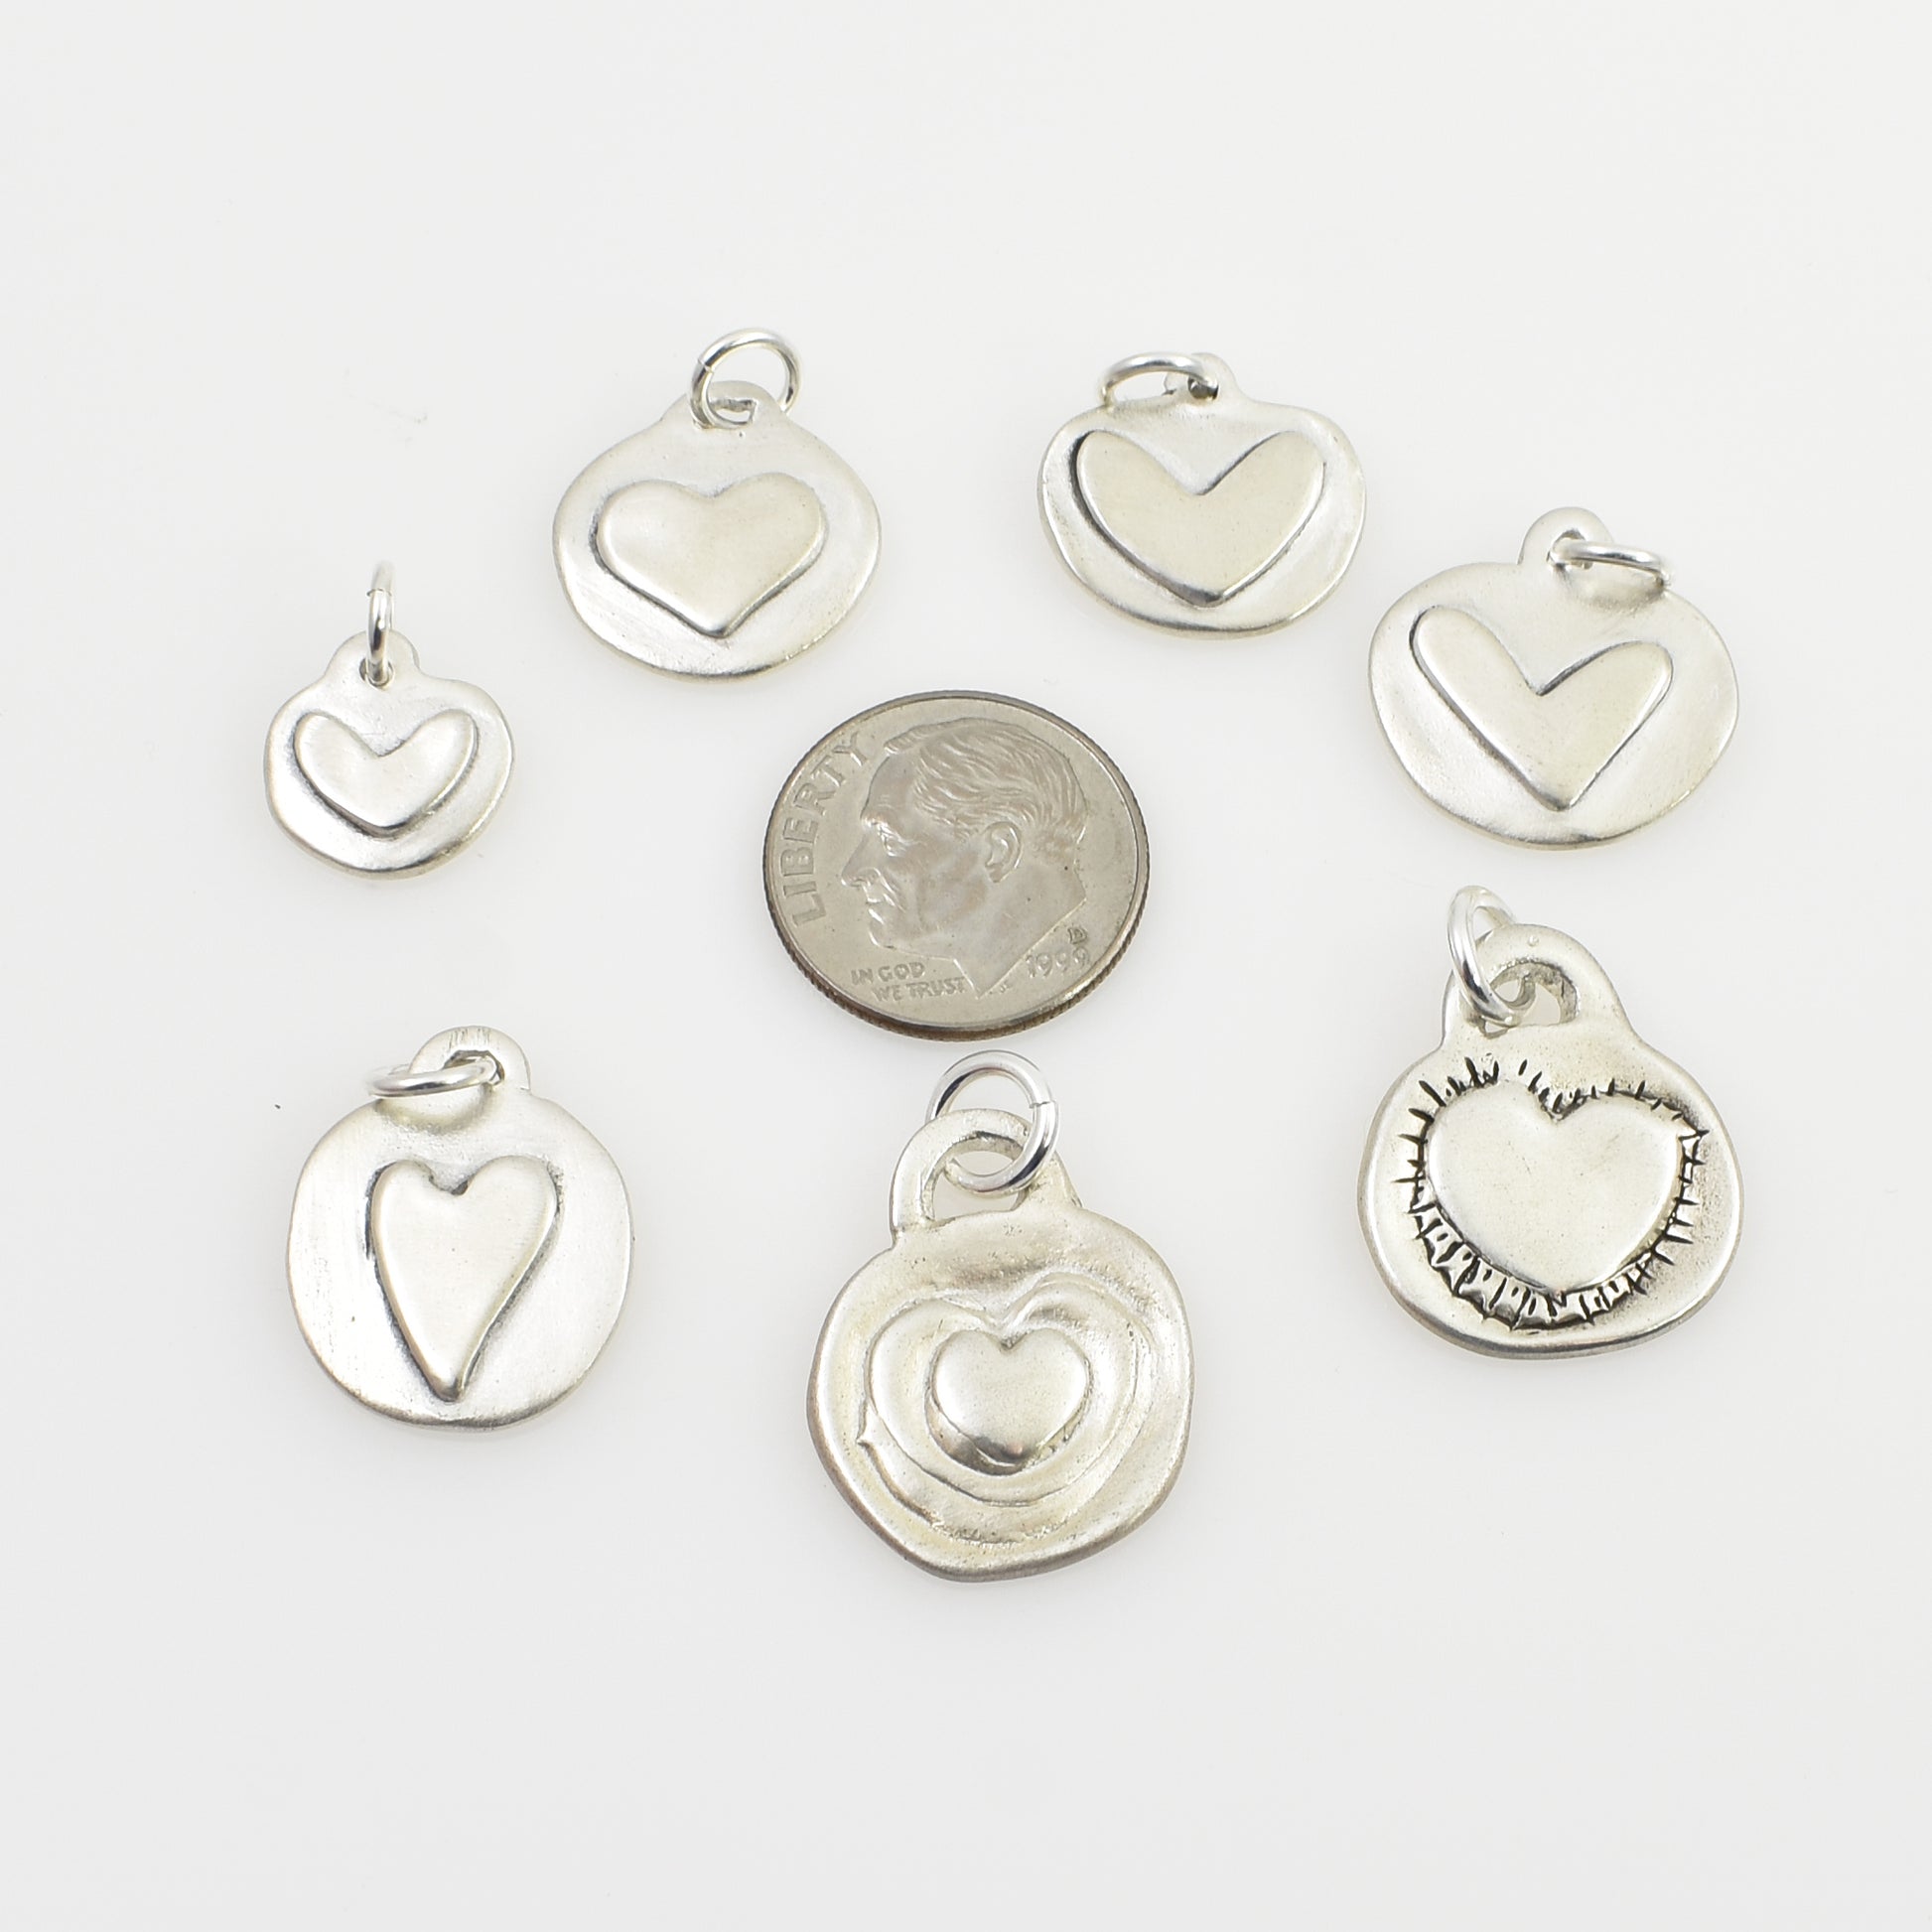 Timeless Hearts - Hearts on Circles All Charms next to dime for size reference